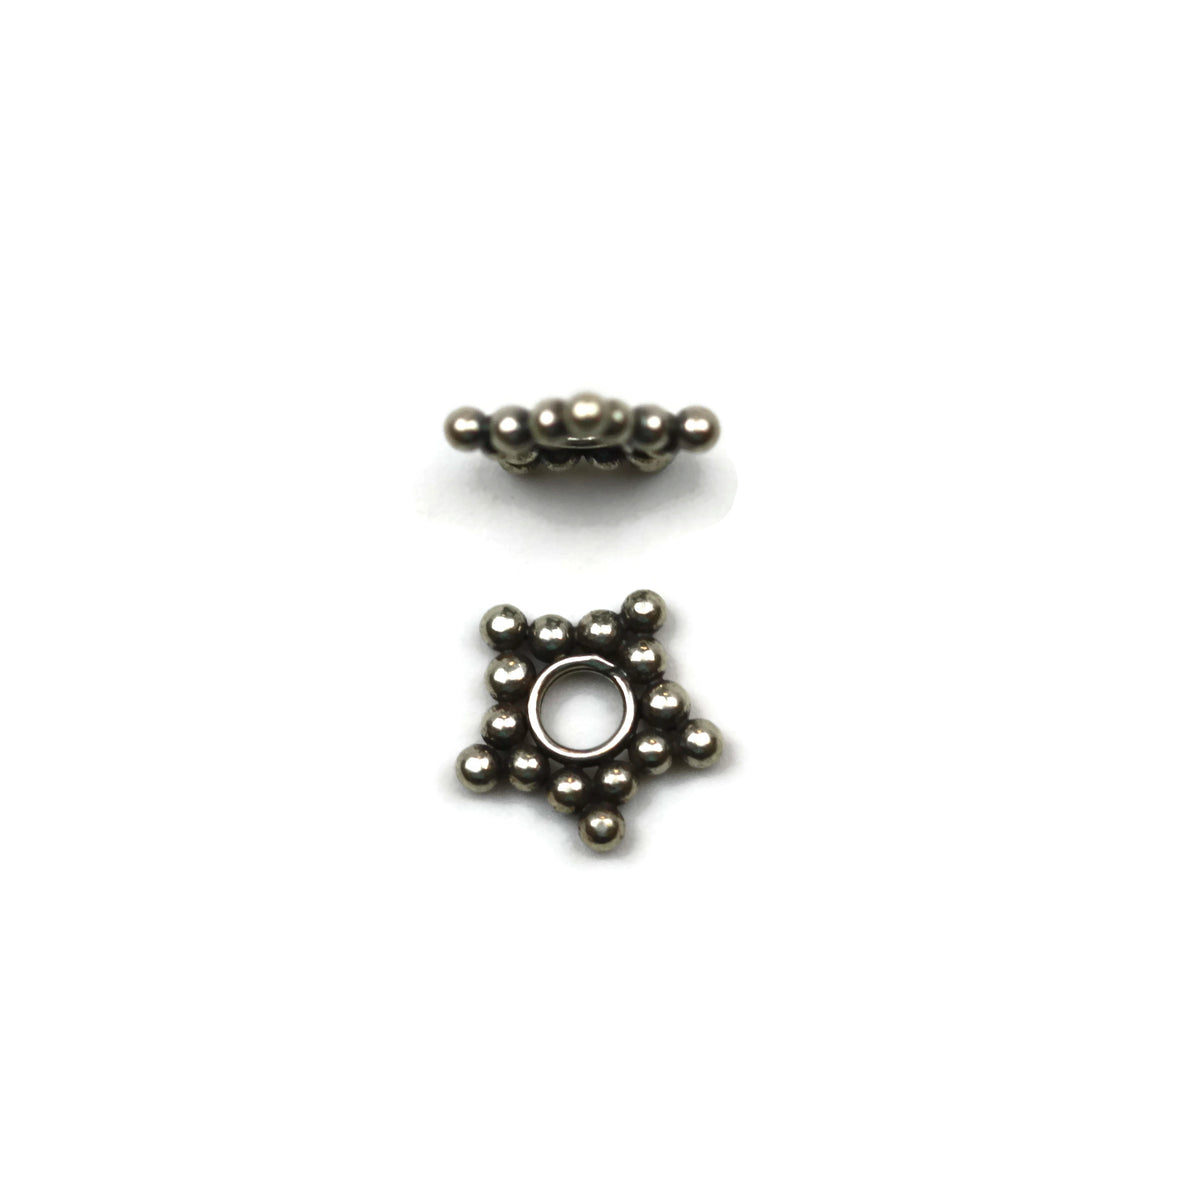 Bali Bead Sterling Silver Star Daisy Spacer 8 mm